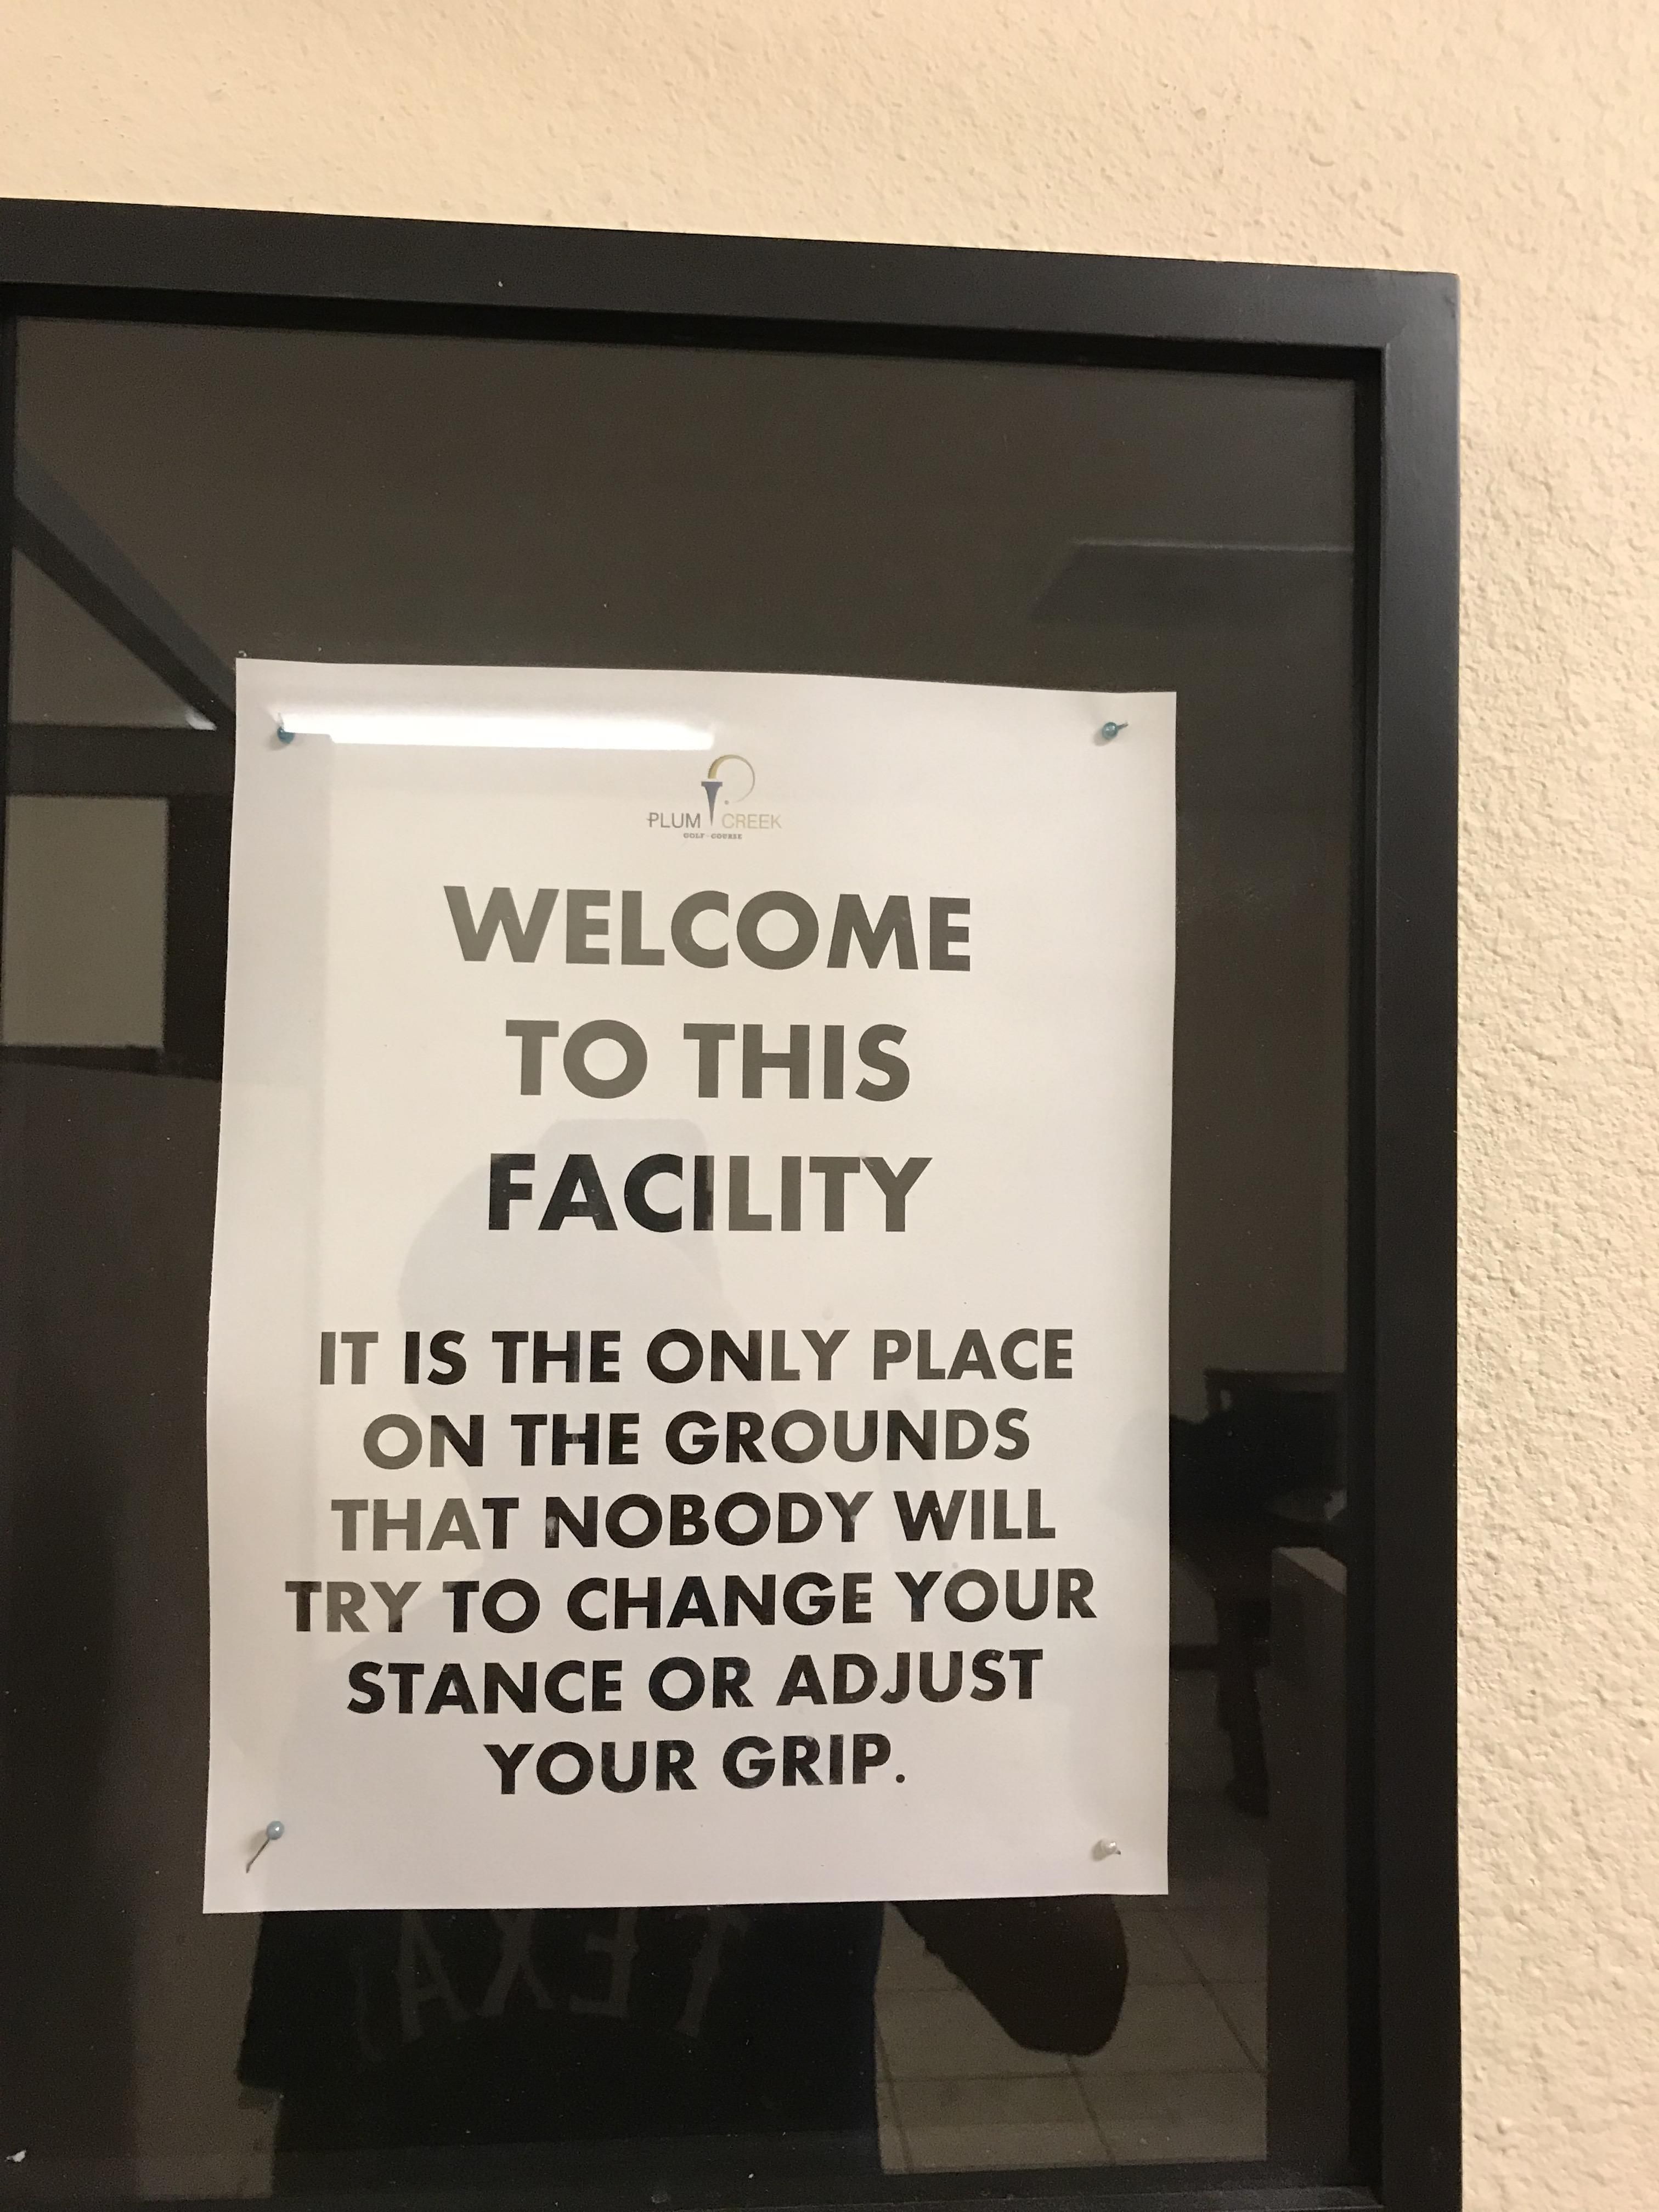 In the men’s restroom at the golf course